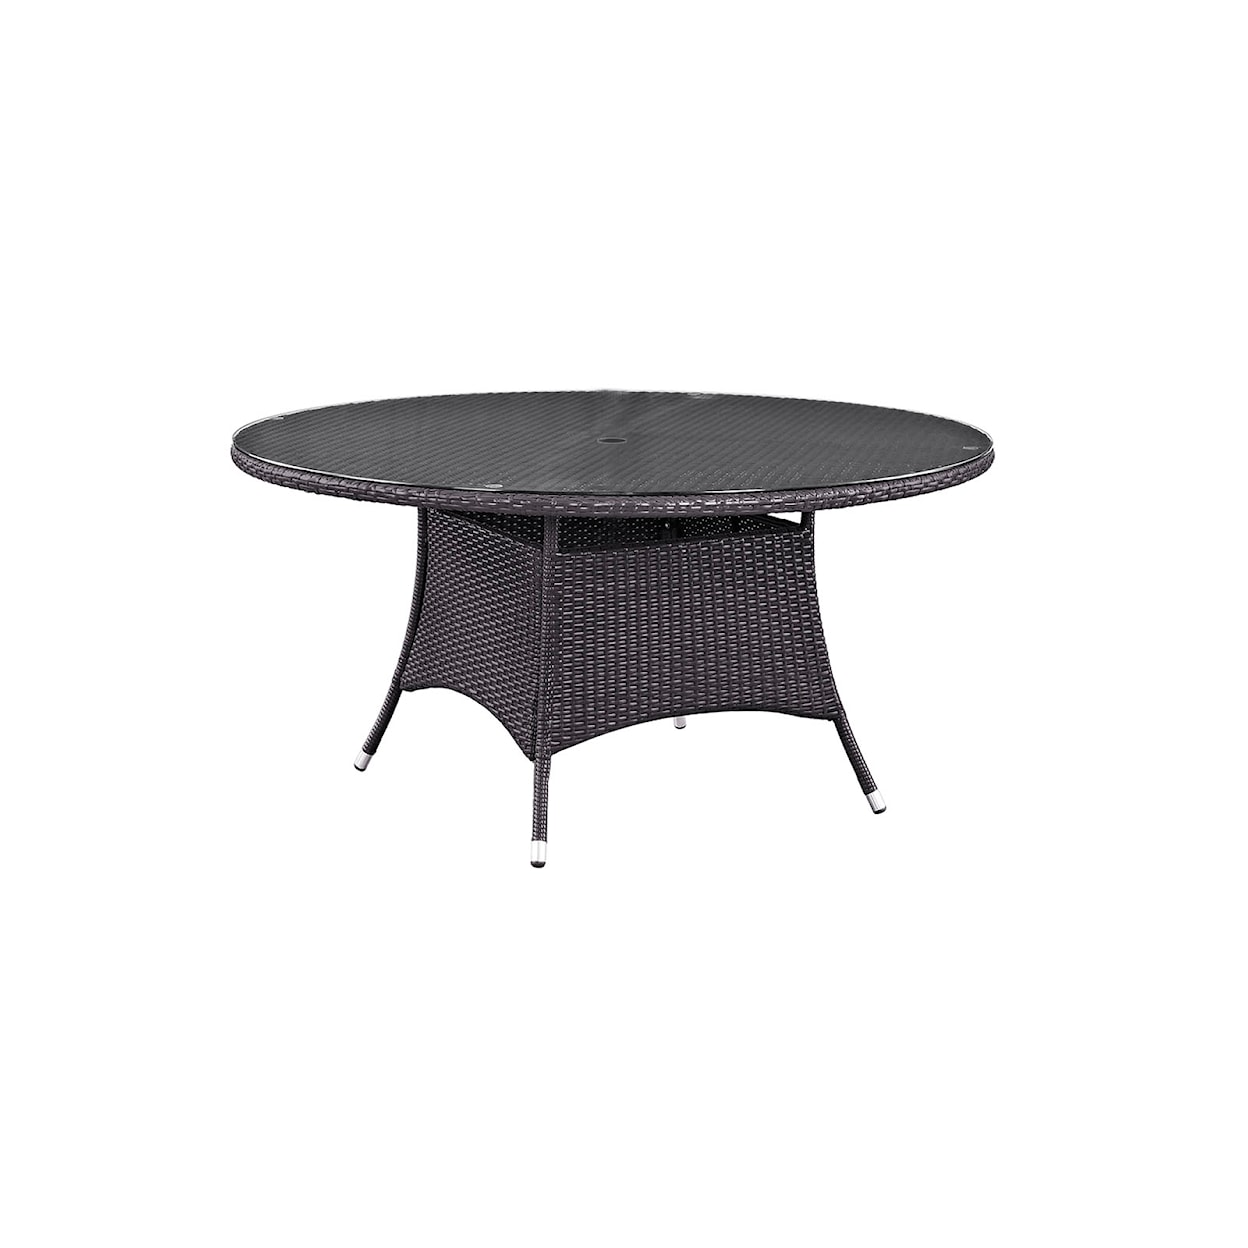 Modway Convene 59" Round Outdoor Dining Table